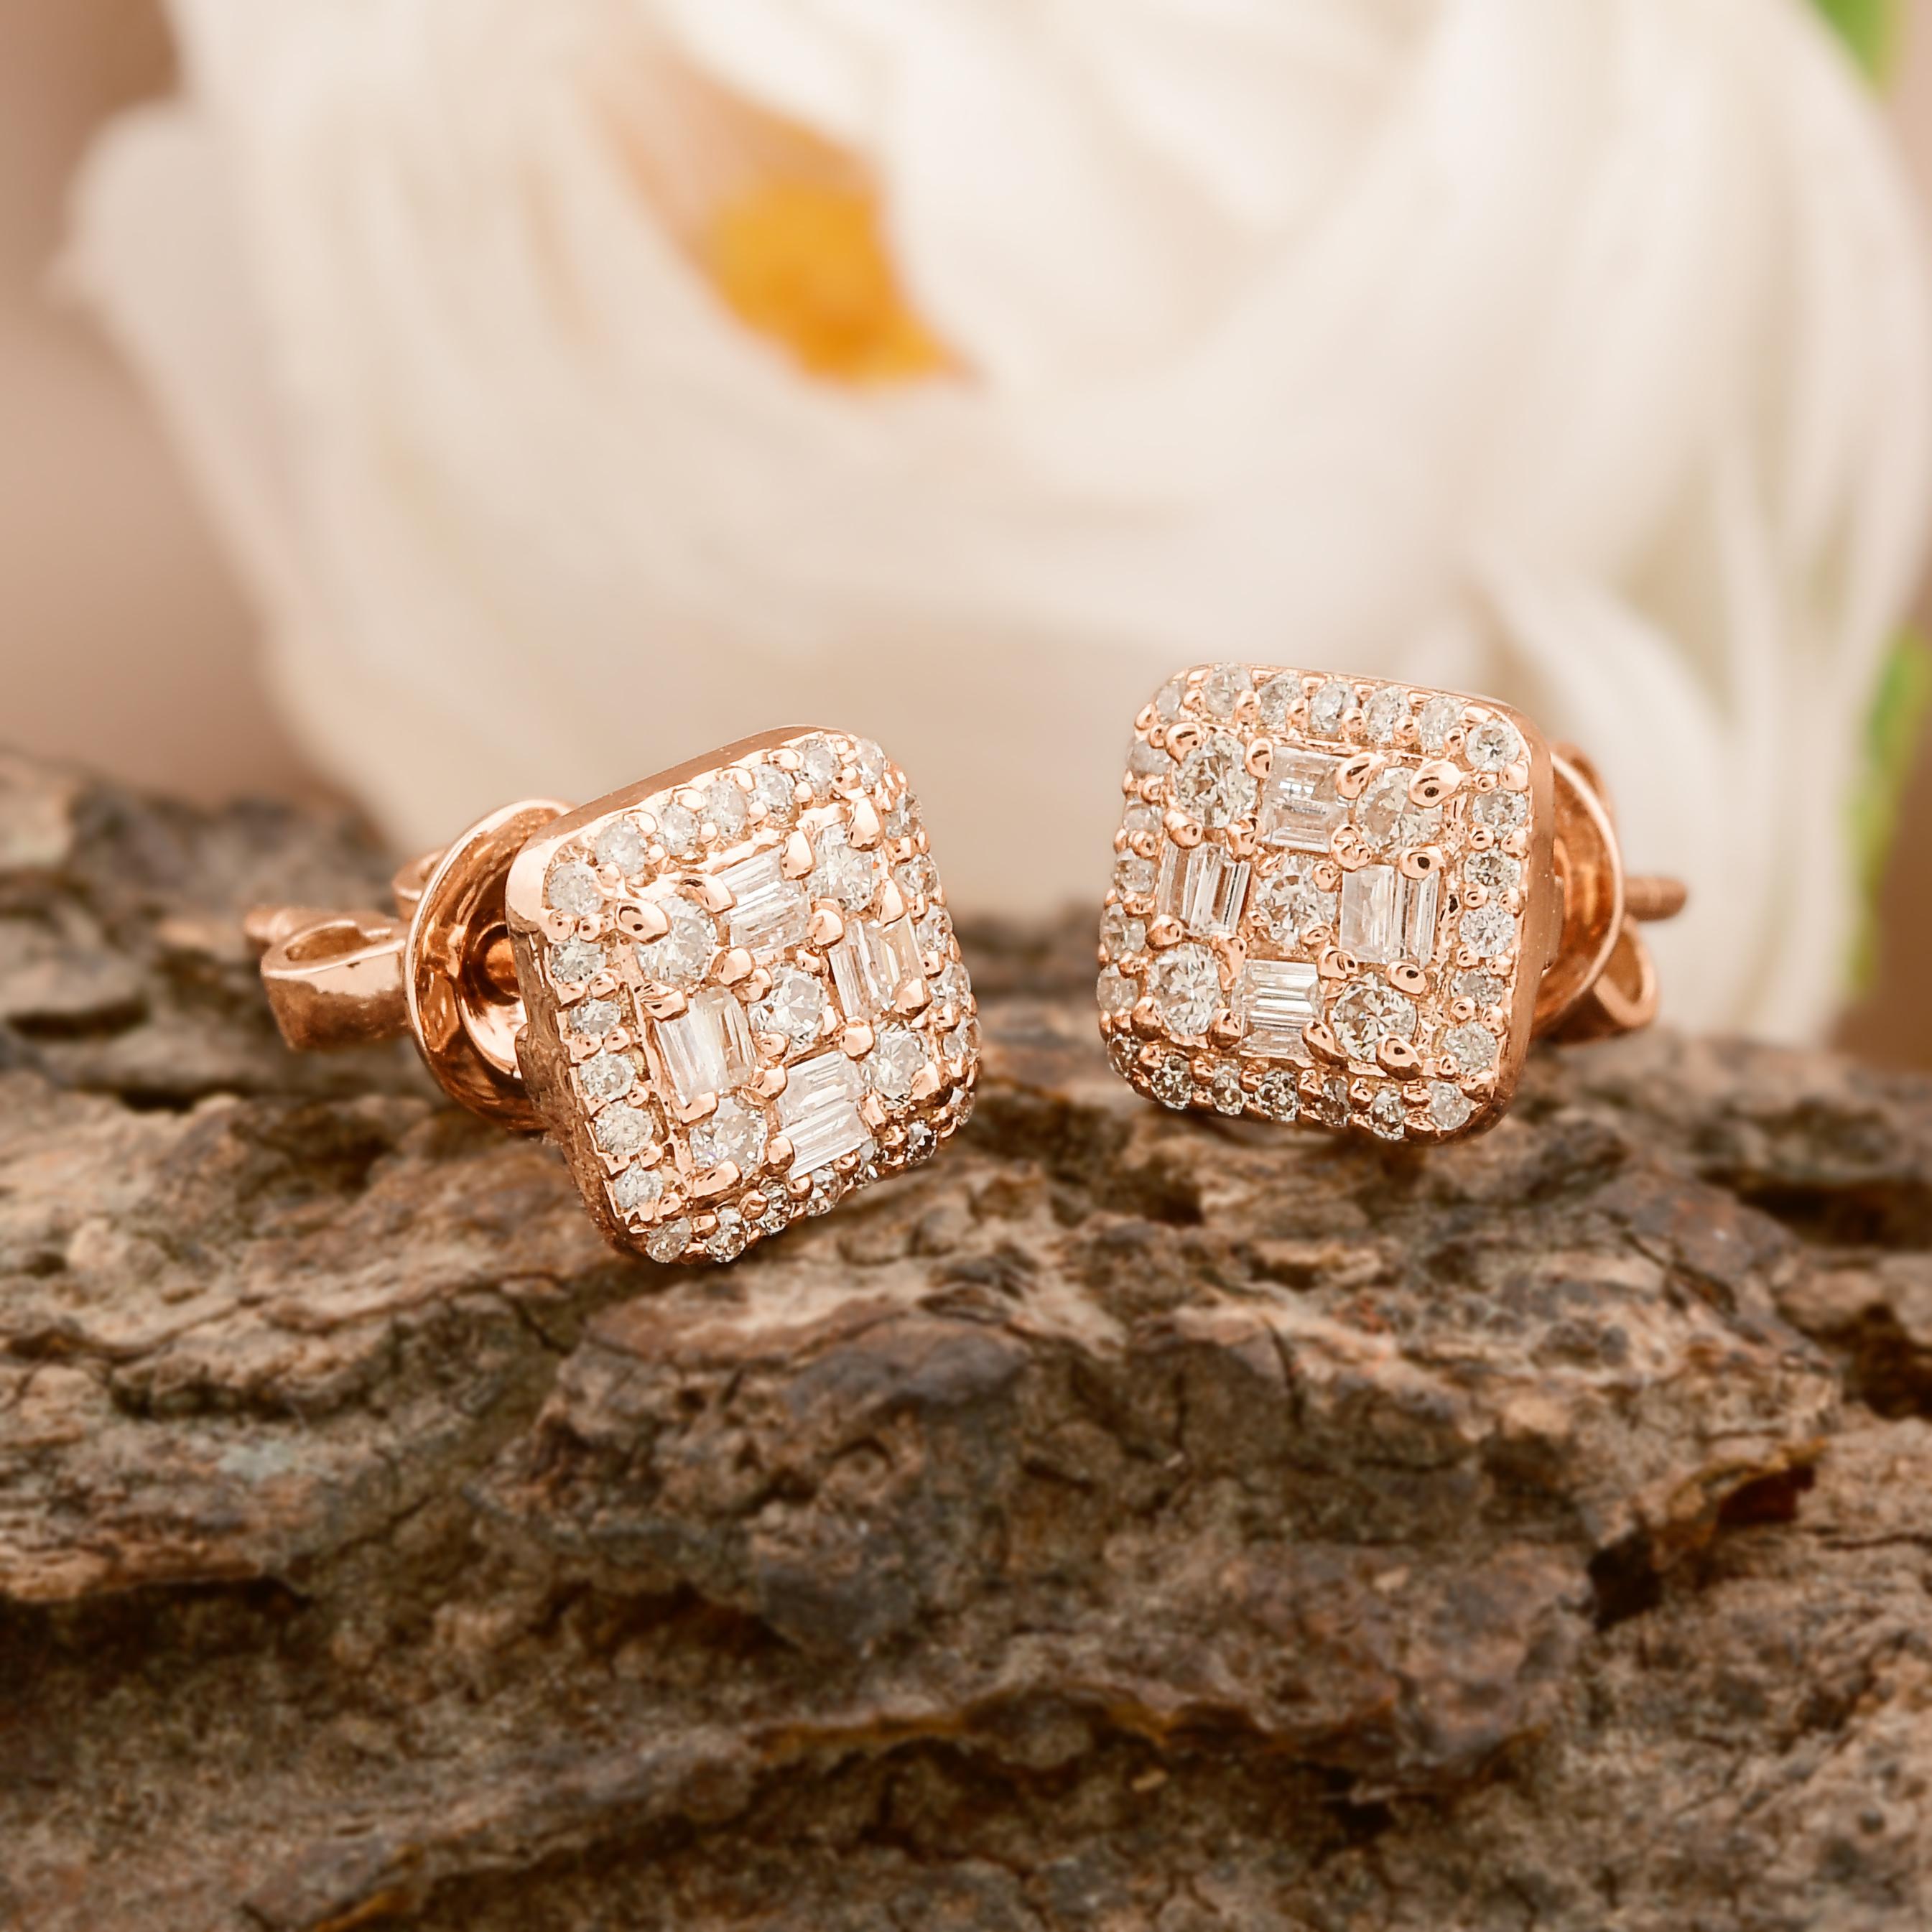 Item Code:- STE-1108J
Gross Weight :- 1.60 gm Approx
Solid 10k Rose Gold Weight :- 1.53 gm Approx
Natural Diamond Weight :- 0.35 ct. Approx ( AVERAGE DIAMOND CLARITY SI1-SI2 & COLOR H-I )
Earrings Size :- 8 mm approx.

✦